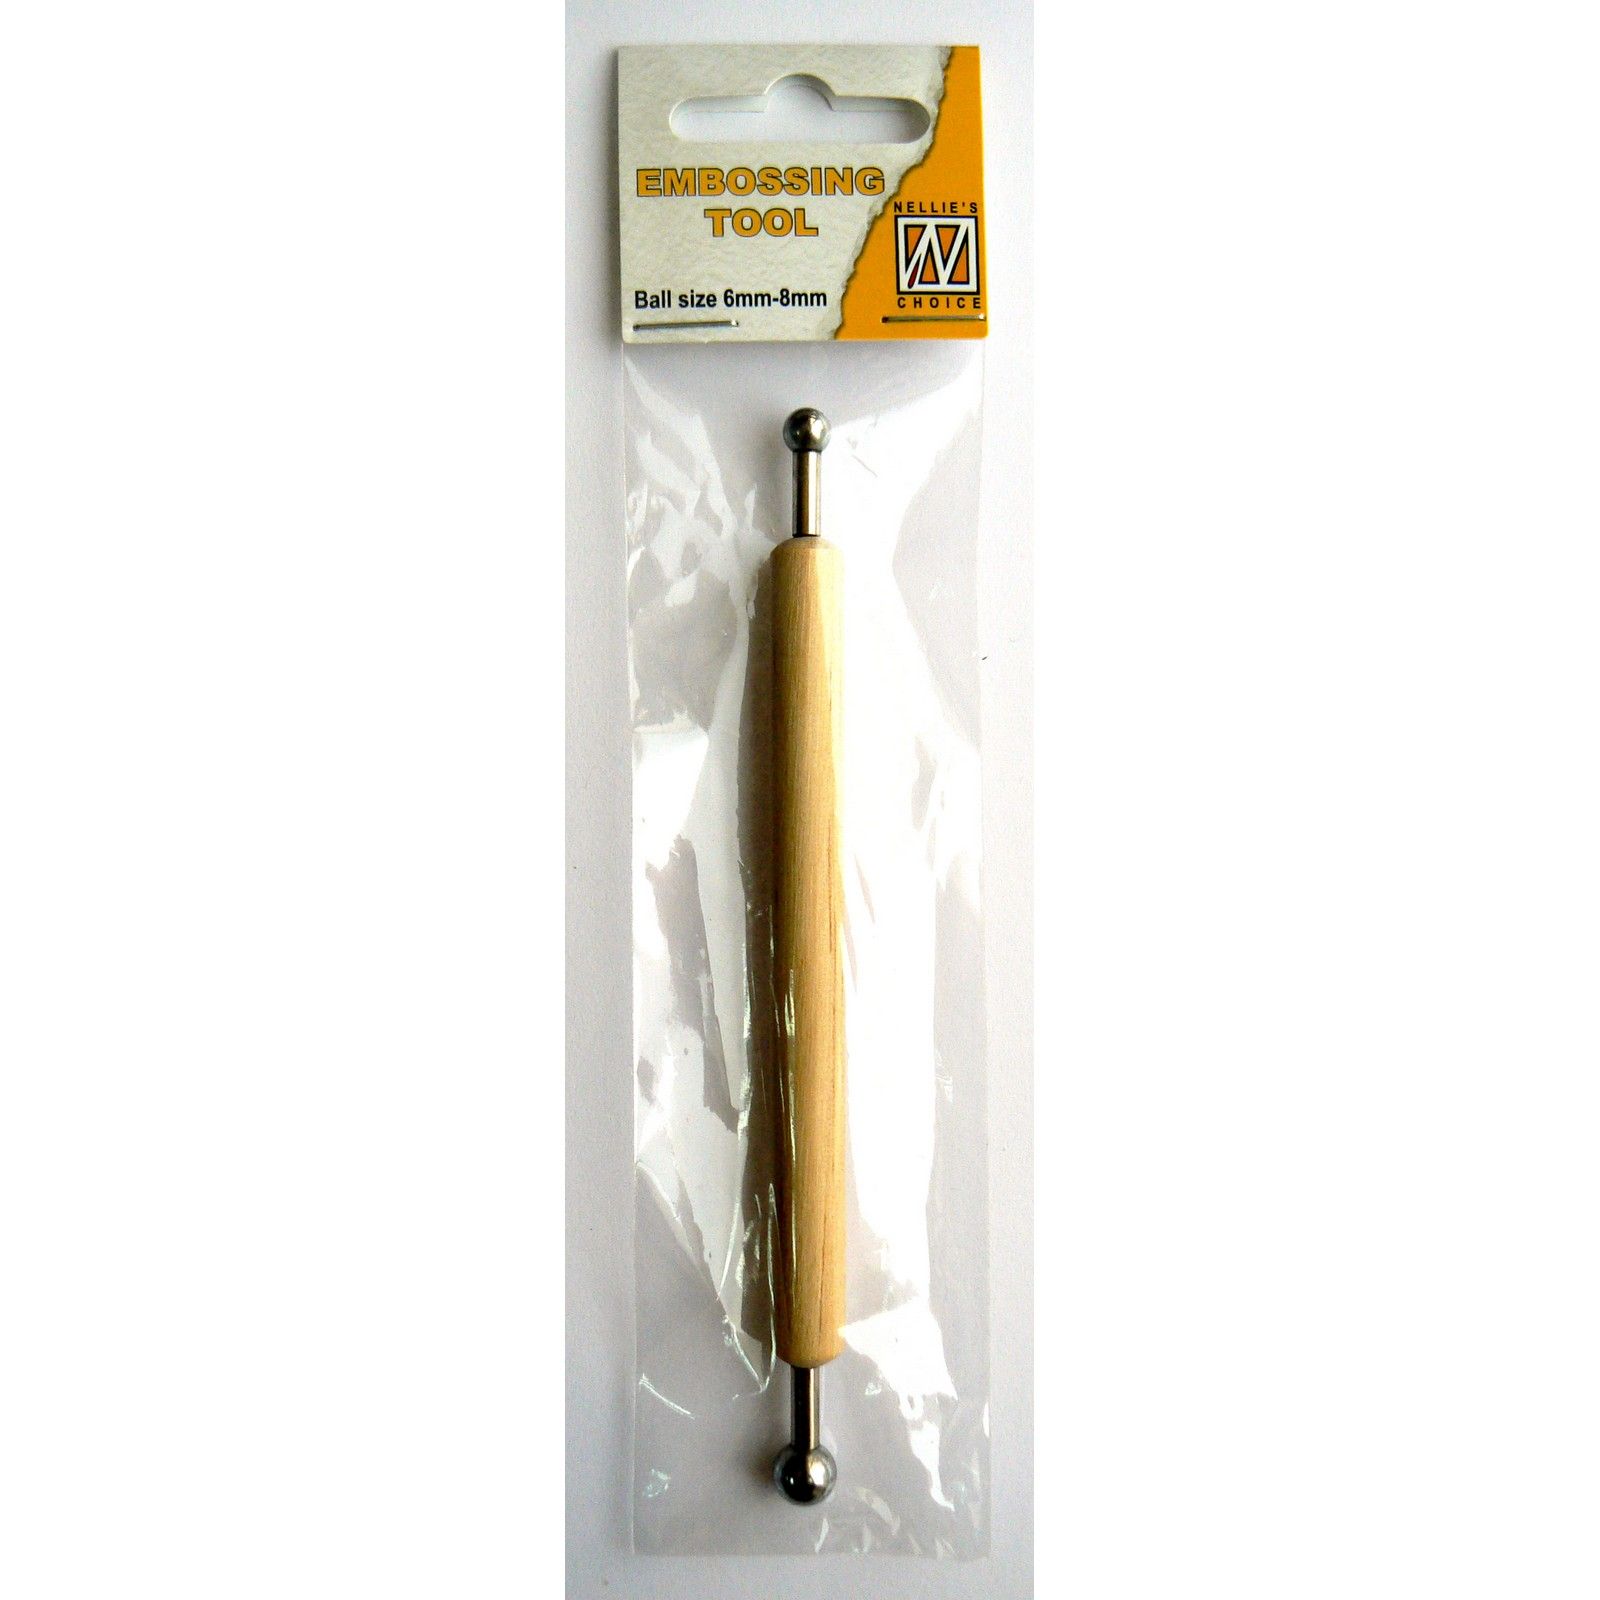 Nellie's Choice • Folding Tool Embossing Tool 9-8,8mm Ball